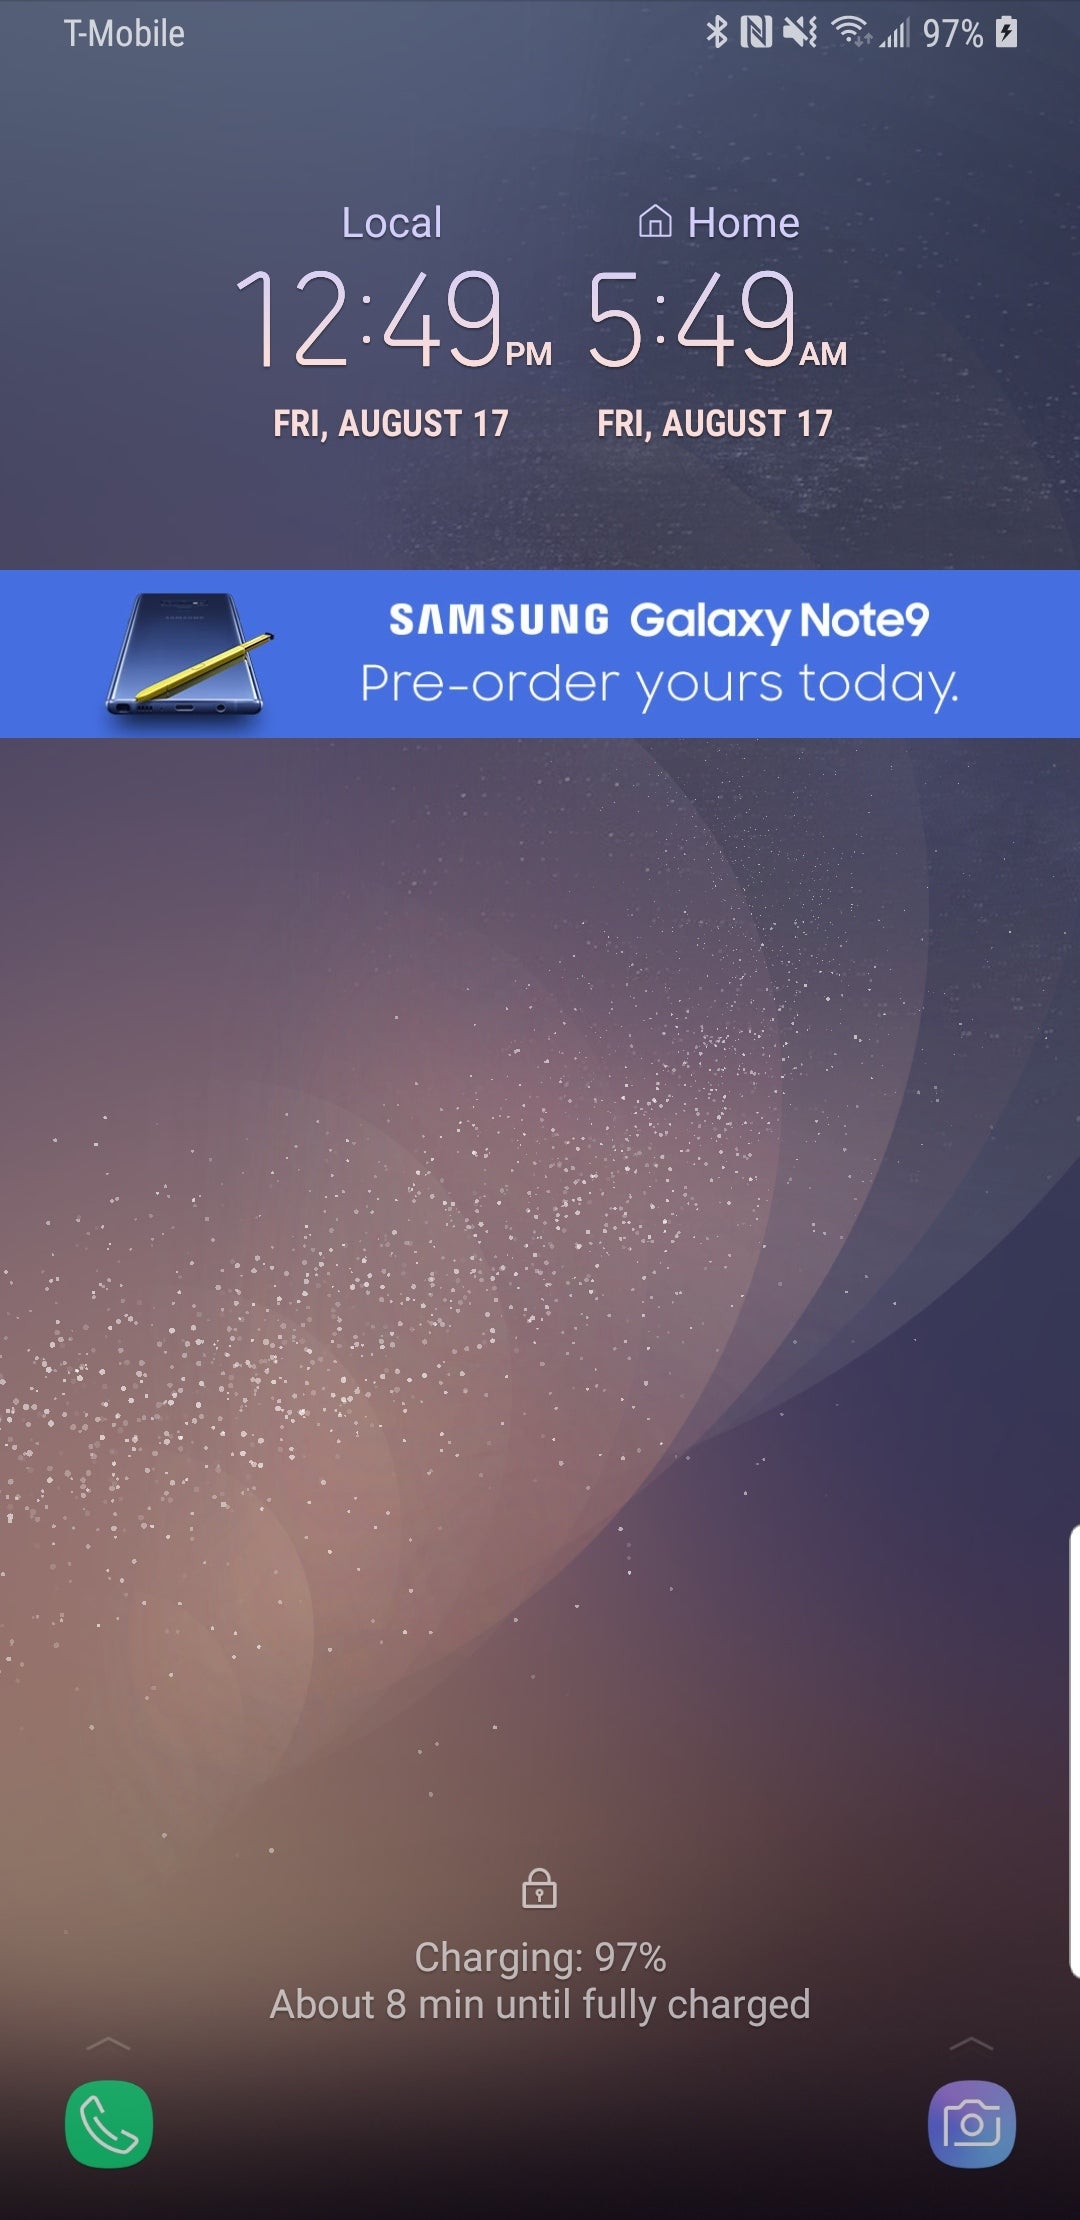 Samsung at it again: users getting unsolicited Note 9 ads on their older Galaxy devices